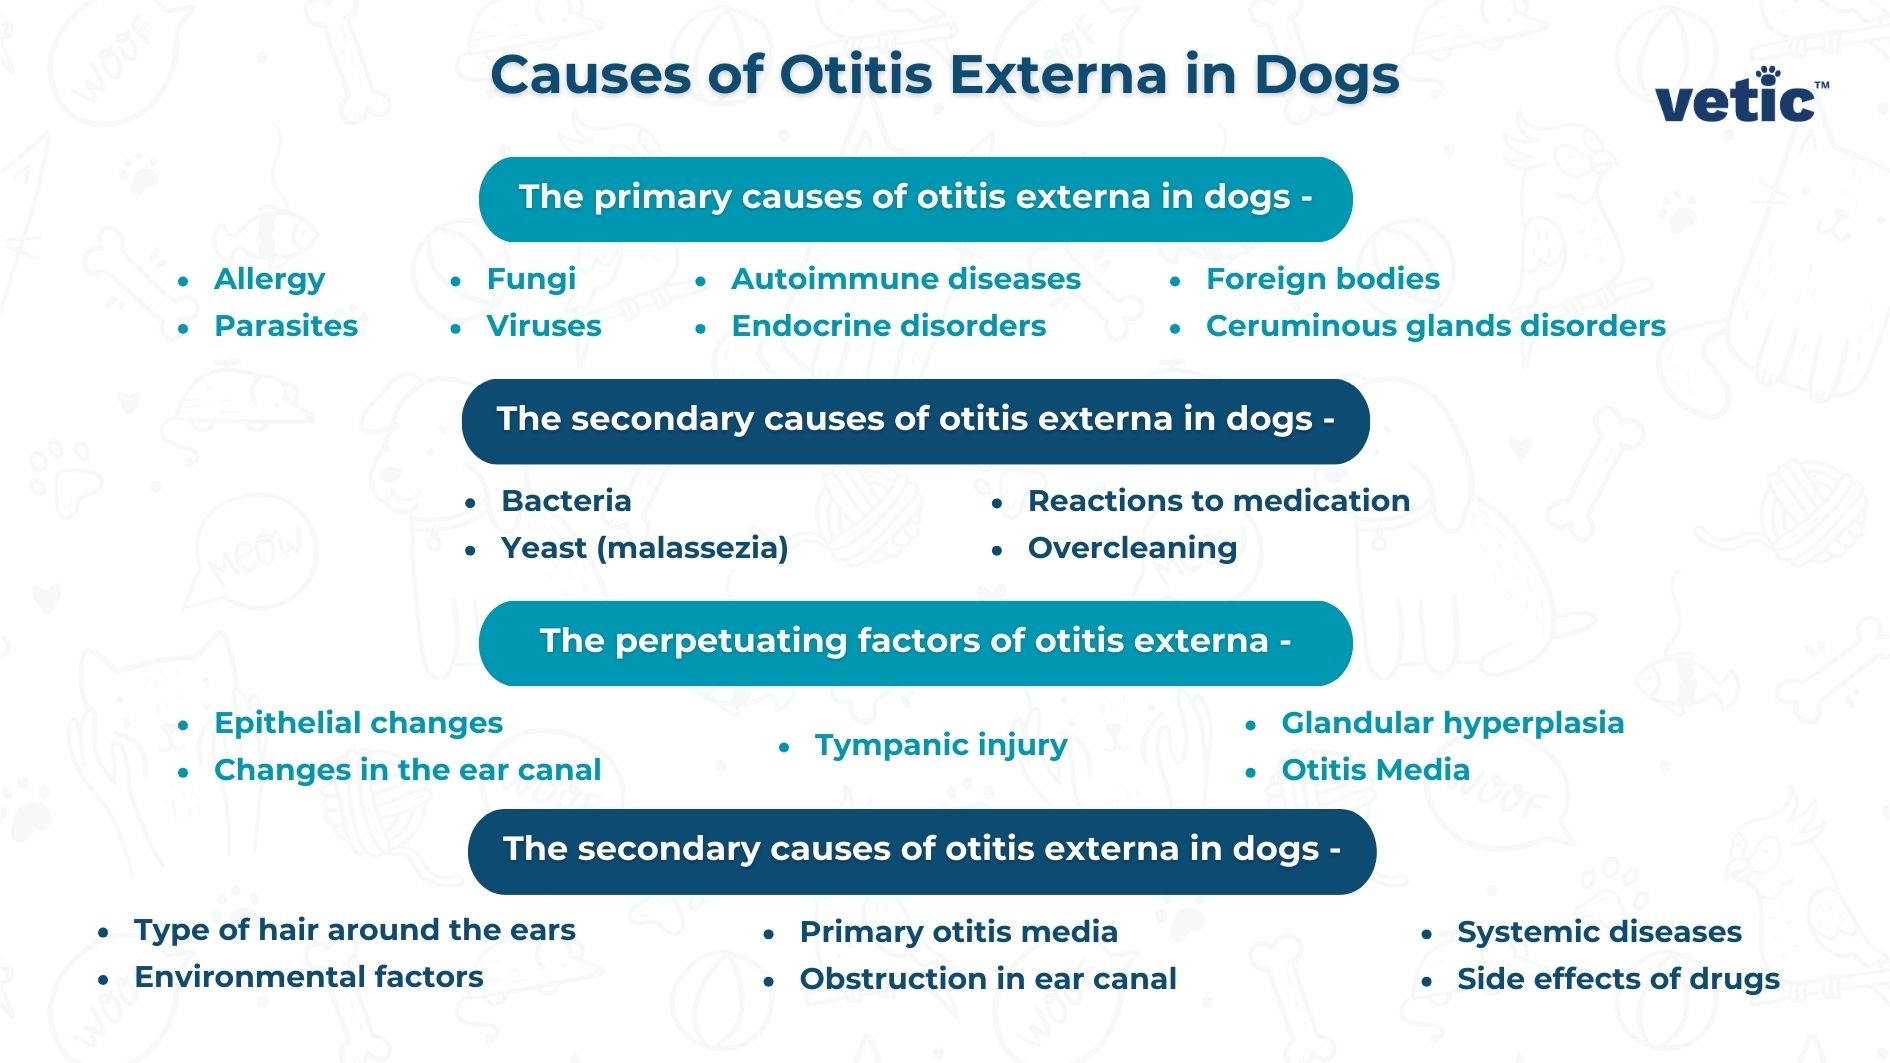 The image with a Vetic copyright explains the different causes of Otitis externa - Causes Otitis Externa in Dogs The primary causes of otitis externa in dogs - Allergy Parasites Fungi Viruses Autoimmune diseases Endocrine disorders Foreign bodies Ceruminous glands disorders The secondary causes of otitis externa in dogs - Bacteria Yeast (malassezia) Reactions to medication Overcleaning The perpetuating factors of otitis externa - Epithelial changes Changes in the ear canal Tympanic injury Glandular hyperplasia Otitis Media Predisposing factors of otitis externa - The shape, size and hair density of their ears Environmental factors Primary otitis media Obstruction in ear canal Systemic diseases Side effects of drugs